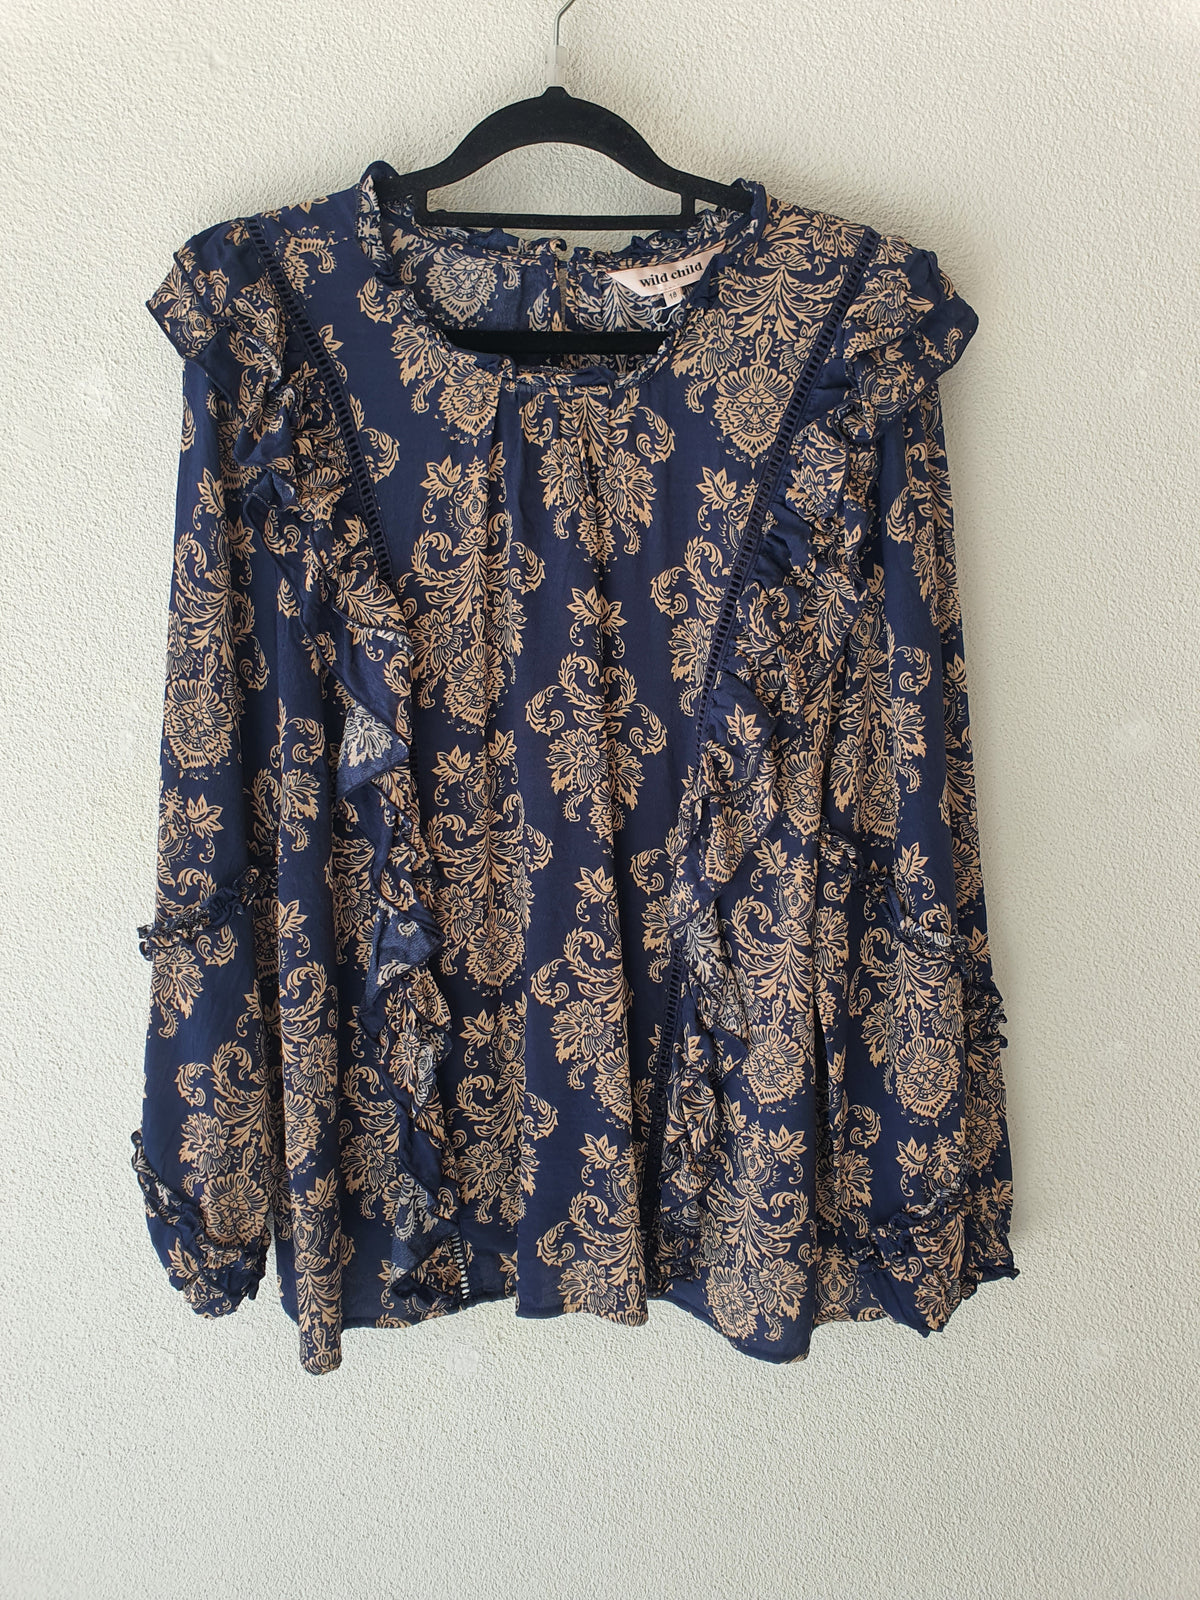 Wild Child Blue and Tan print Top 18